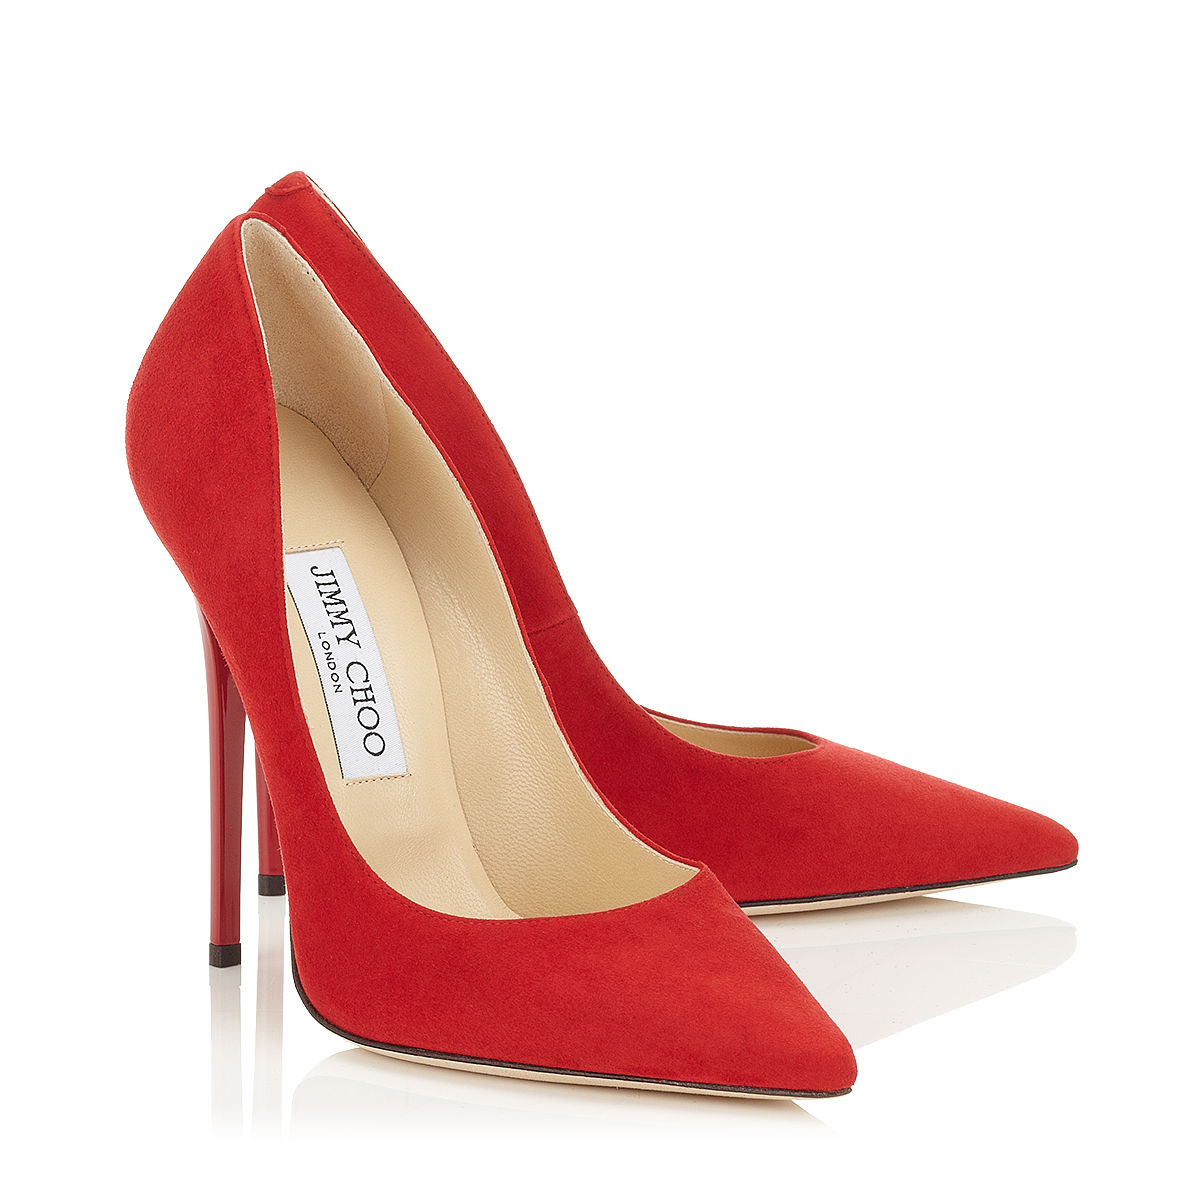 Jimmy choo Cosmic Glitter Finish Leather Pumps in Red | Lyst